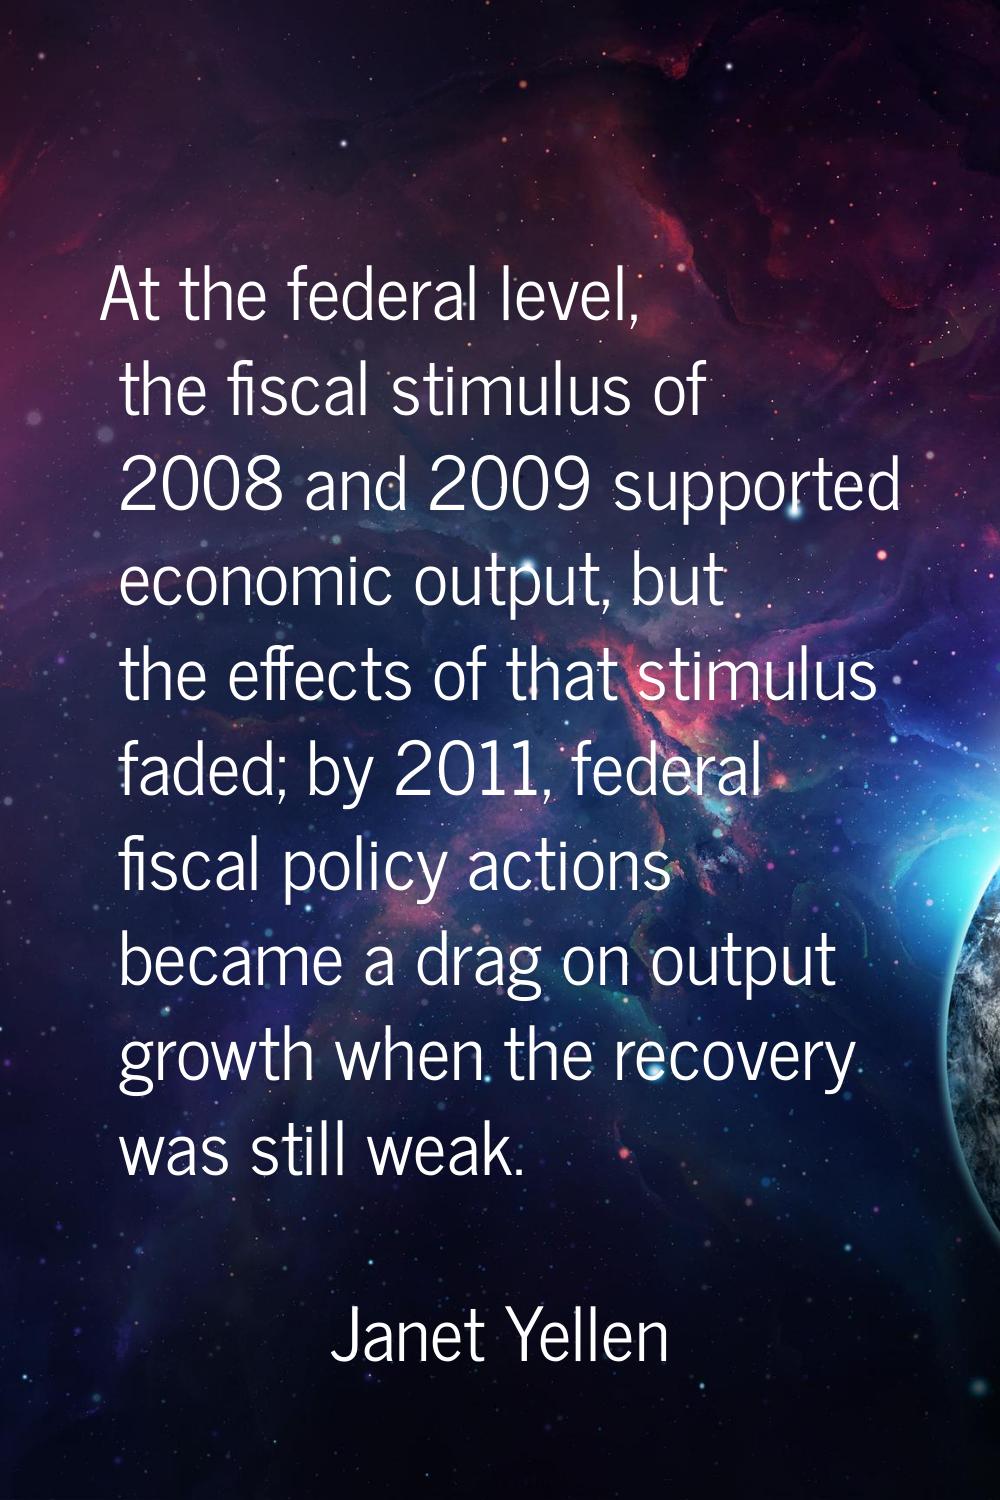 At the federal level, the fiscal stimulus of 2008 and 2009 supported economic output, but the effec